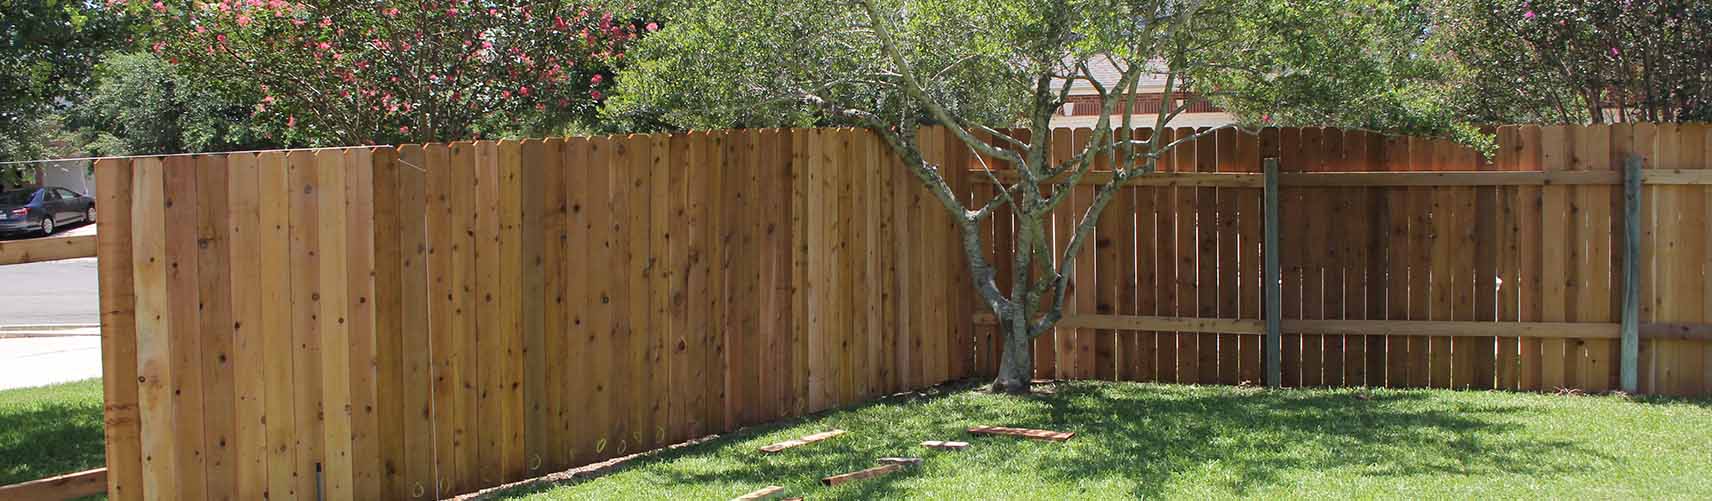 Ocala Fencing Contractor, Landscaping Company and Fence Installation